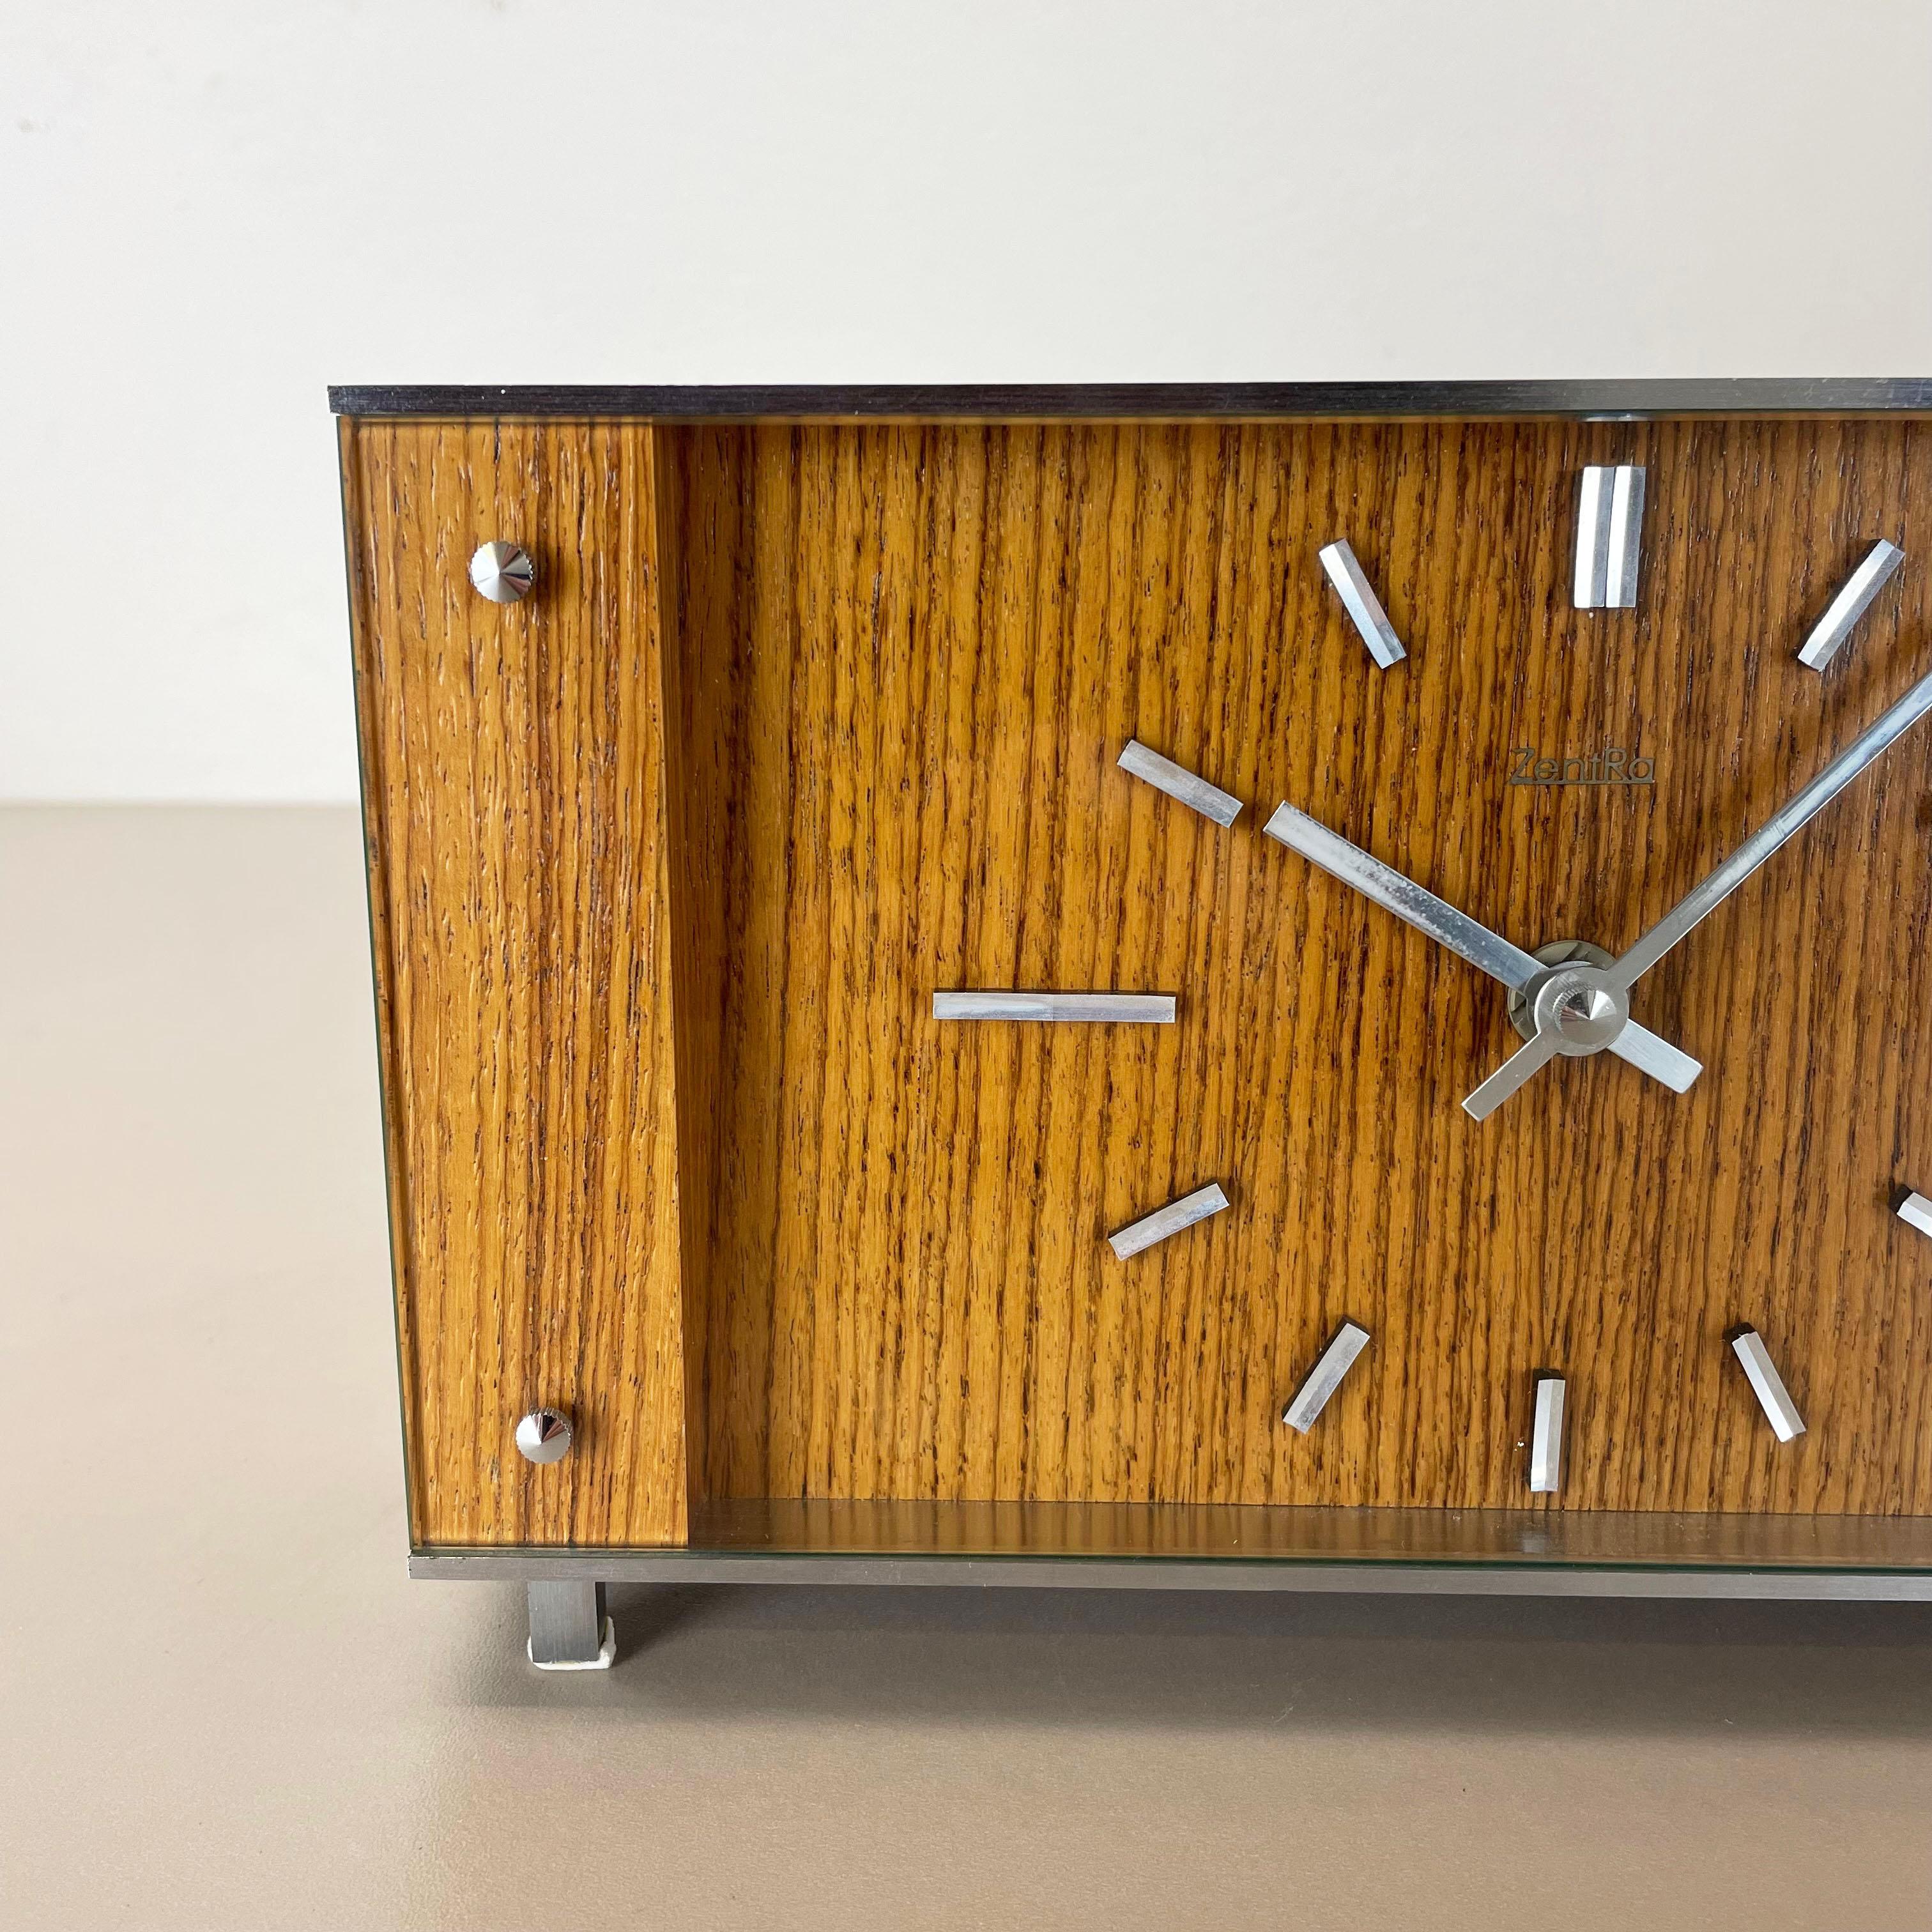 20th Century Vintage Modernist Wooden Teak Metal Table Clock by Zentra, Germany 1970s For Sale